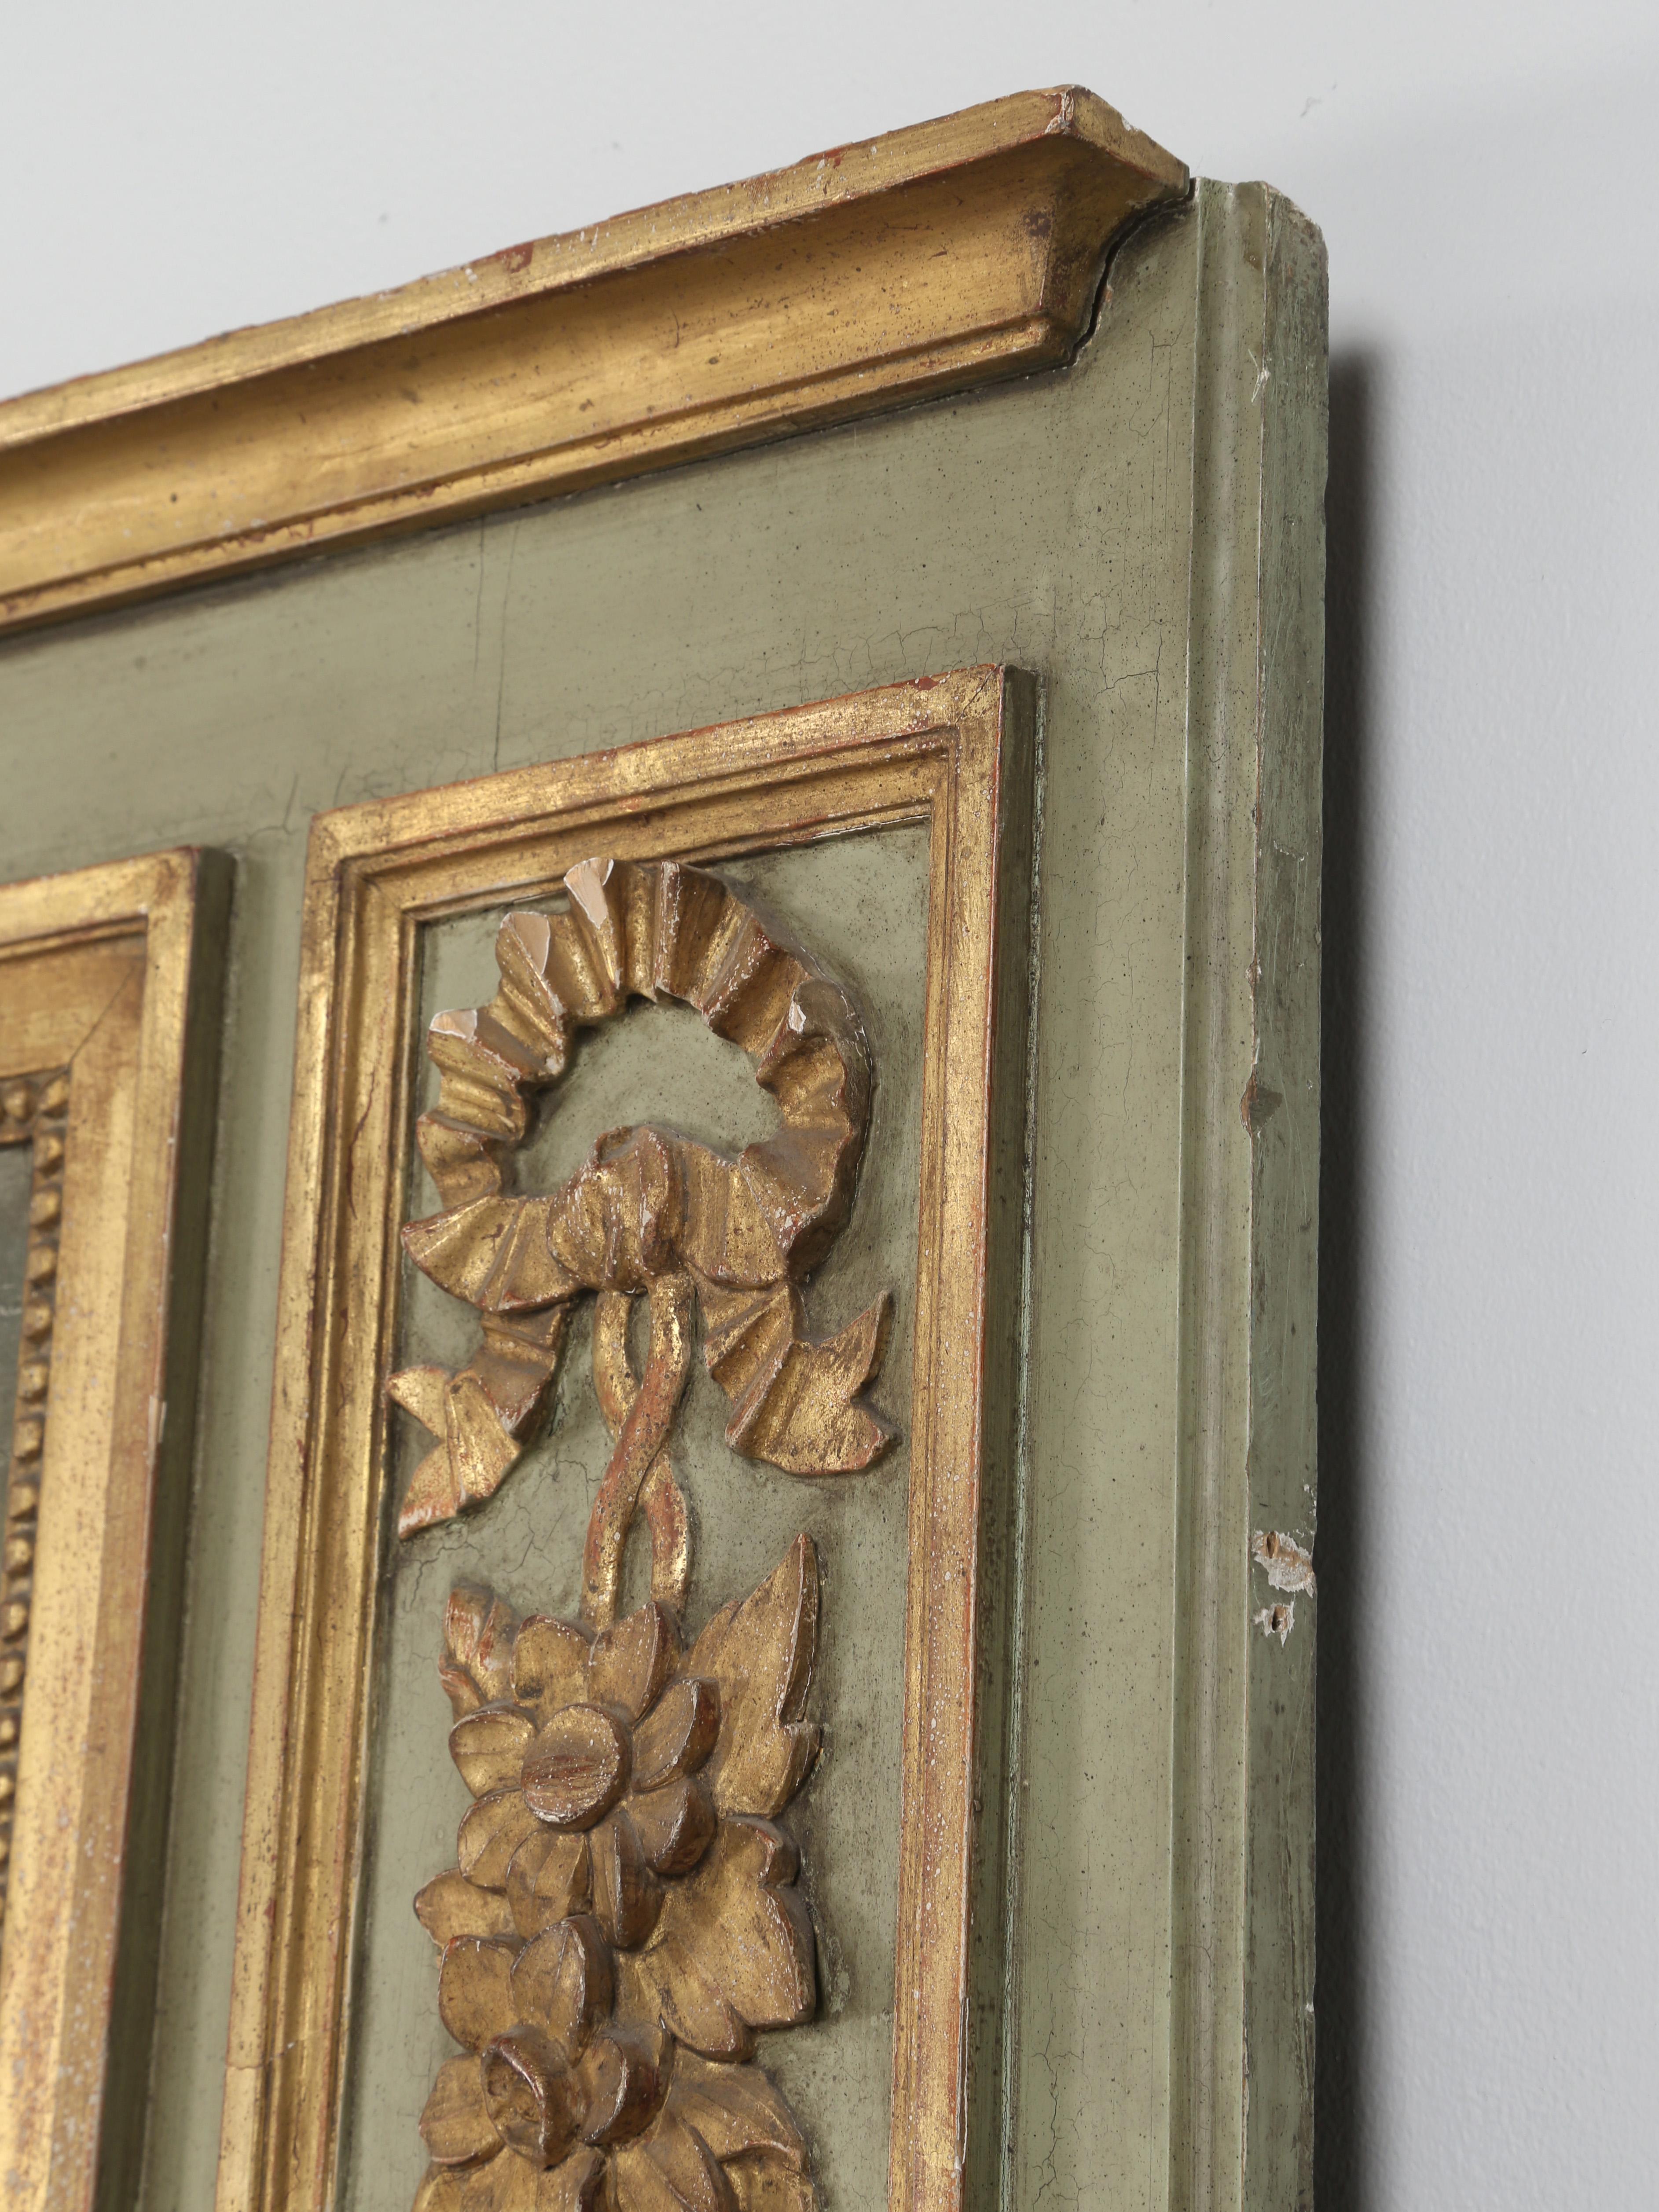 Hand-Carved Antique French Trumeau Mirror Original Paint and Gilding Unrestored Late 1800's For Sale